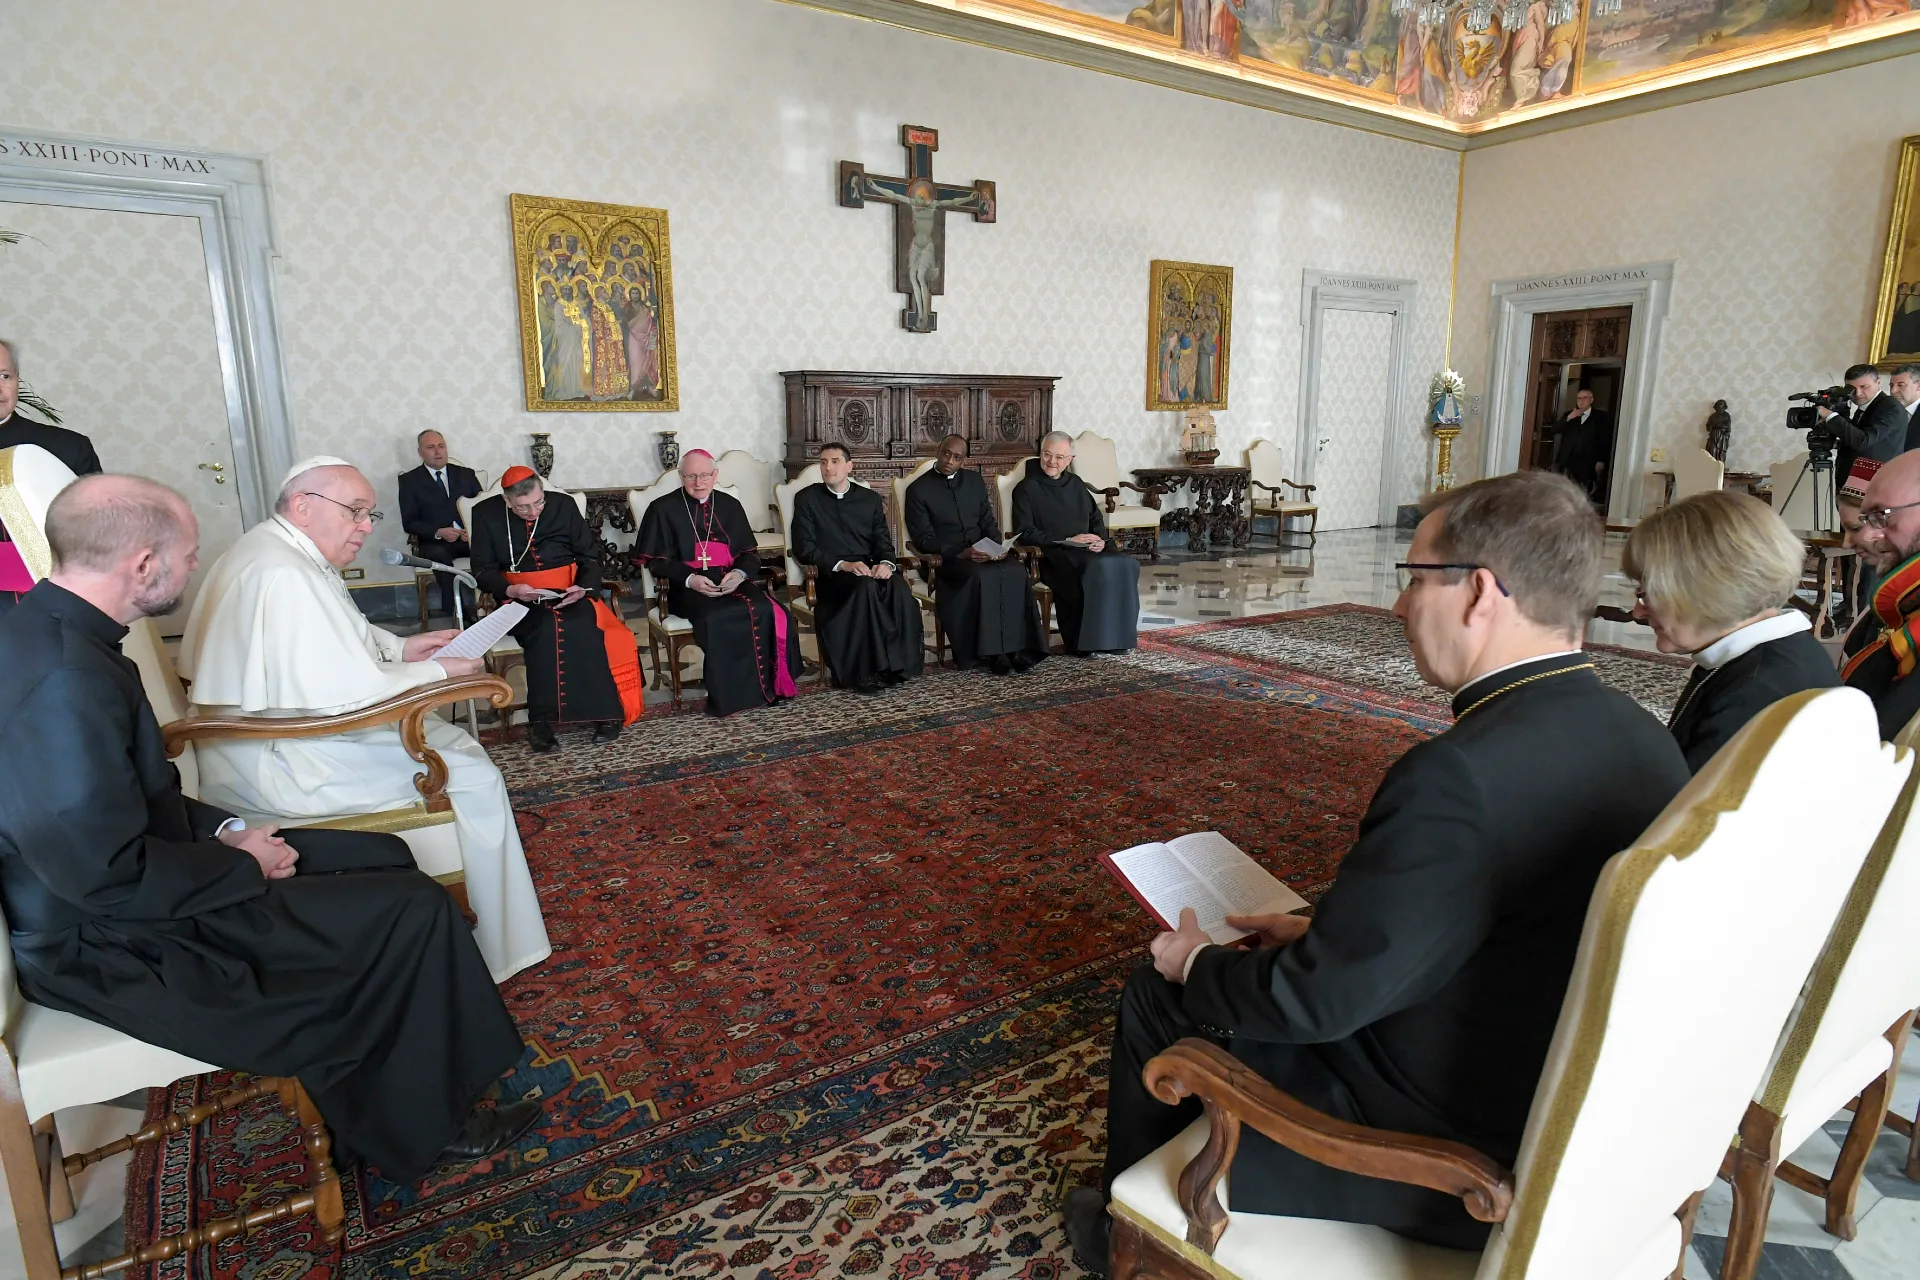 Pope Francis looks ahead to the 1700th anniversary of the Council of